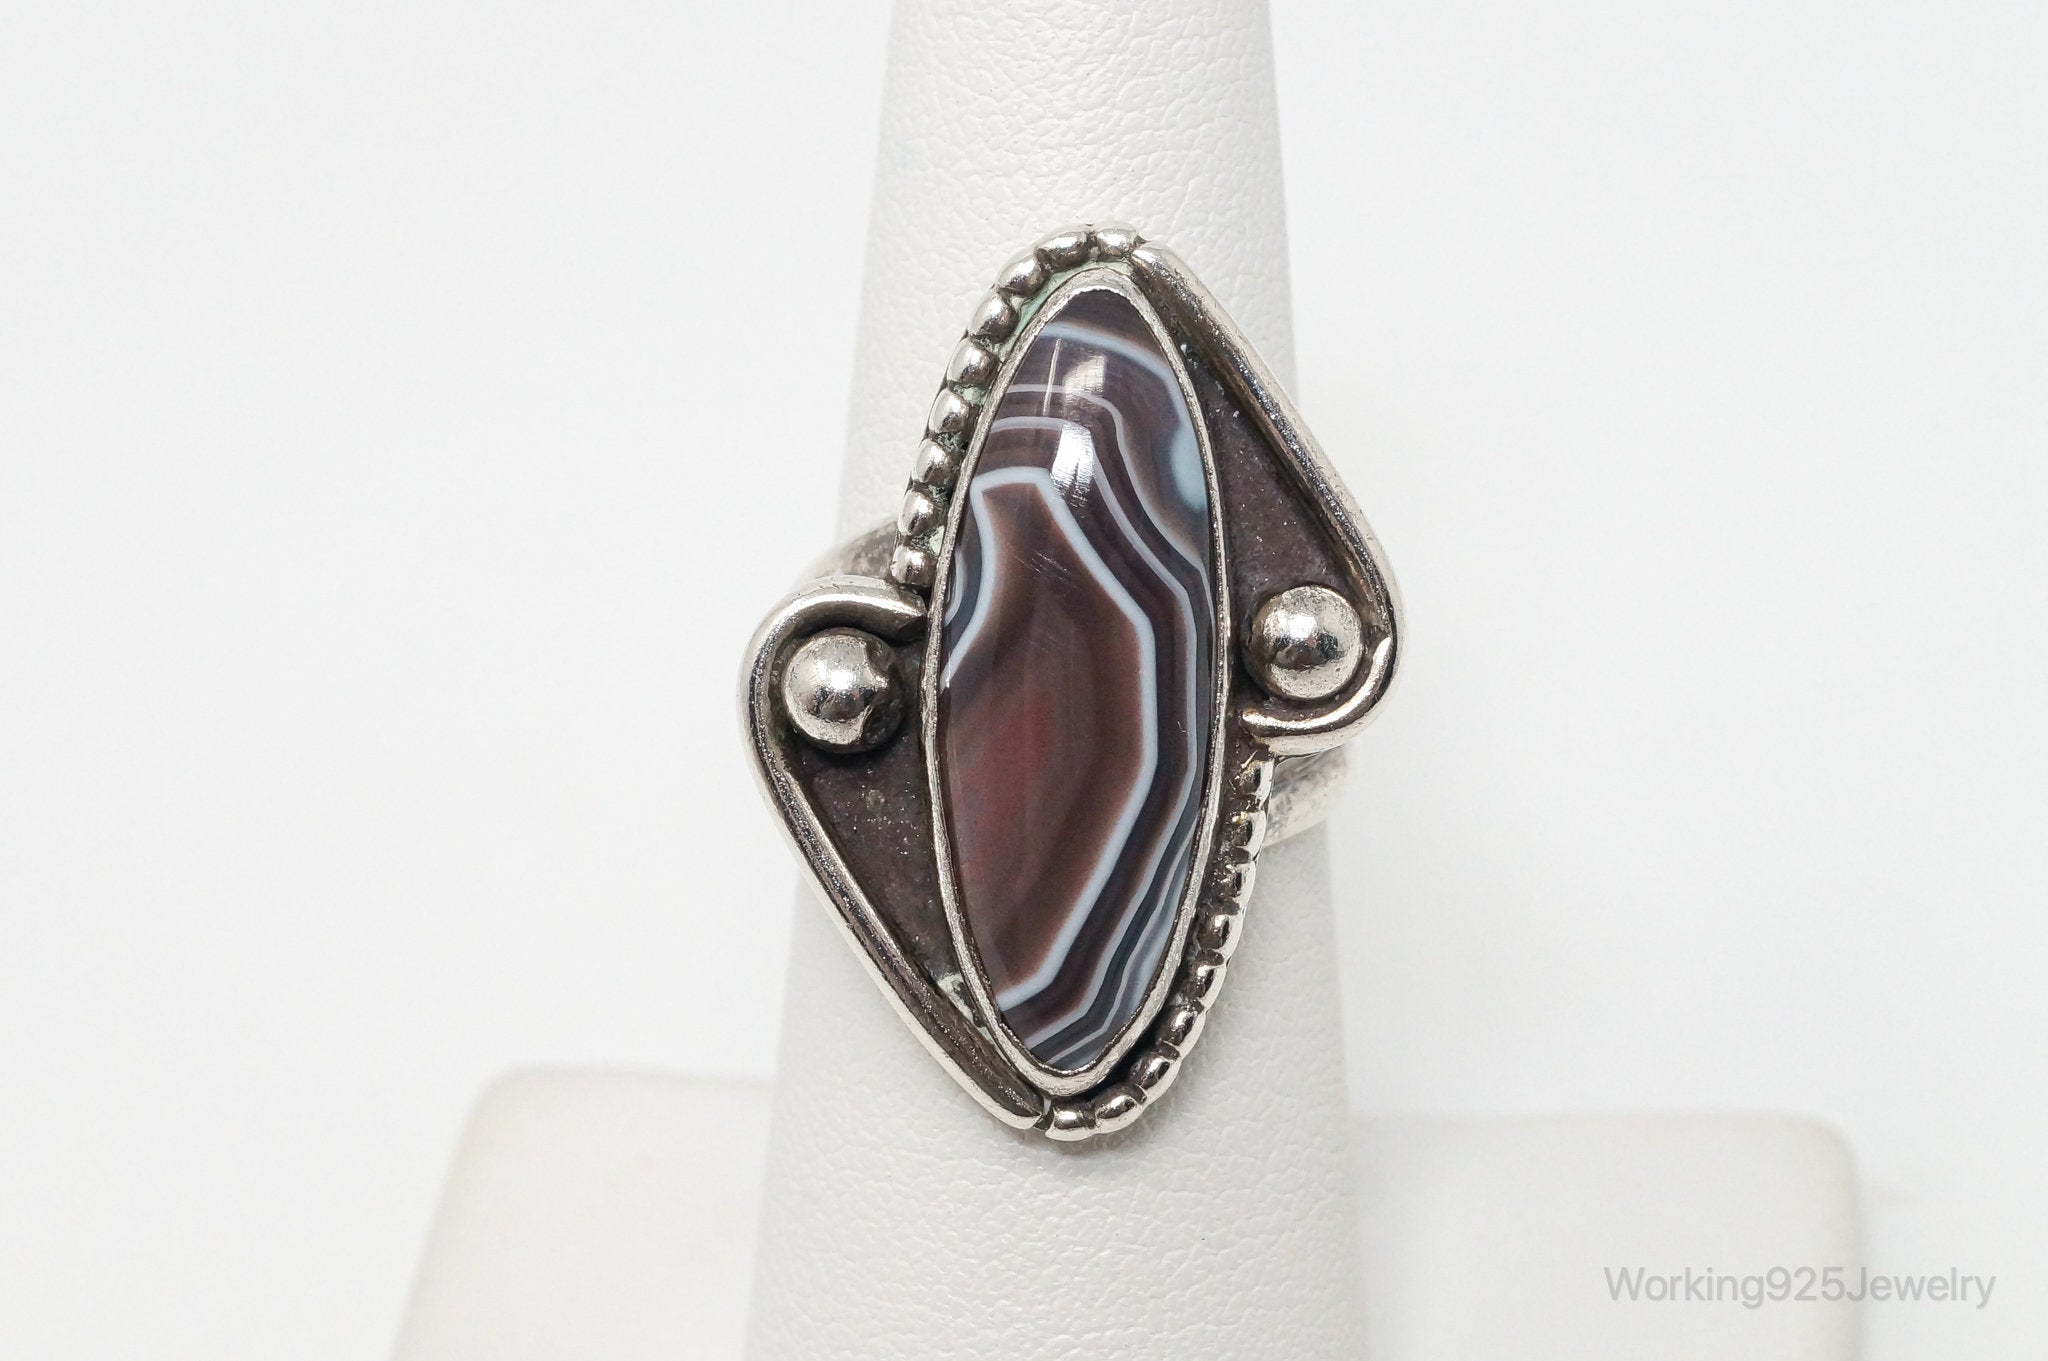 Vintage Native American Lace Agate Unsigned Sterling Silver Ring - Sz 6.75